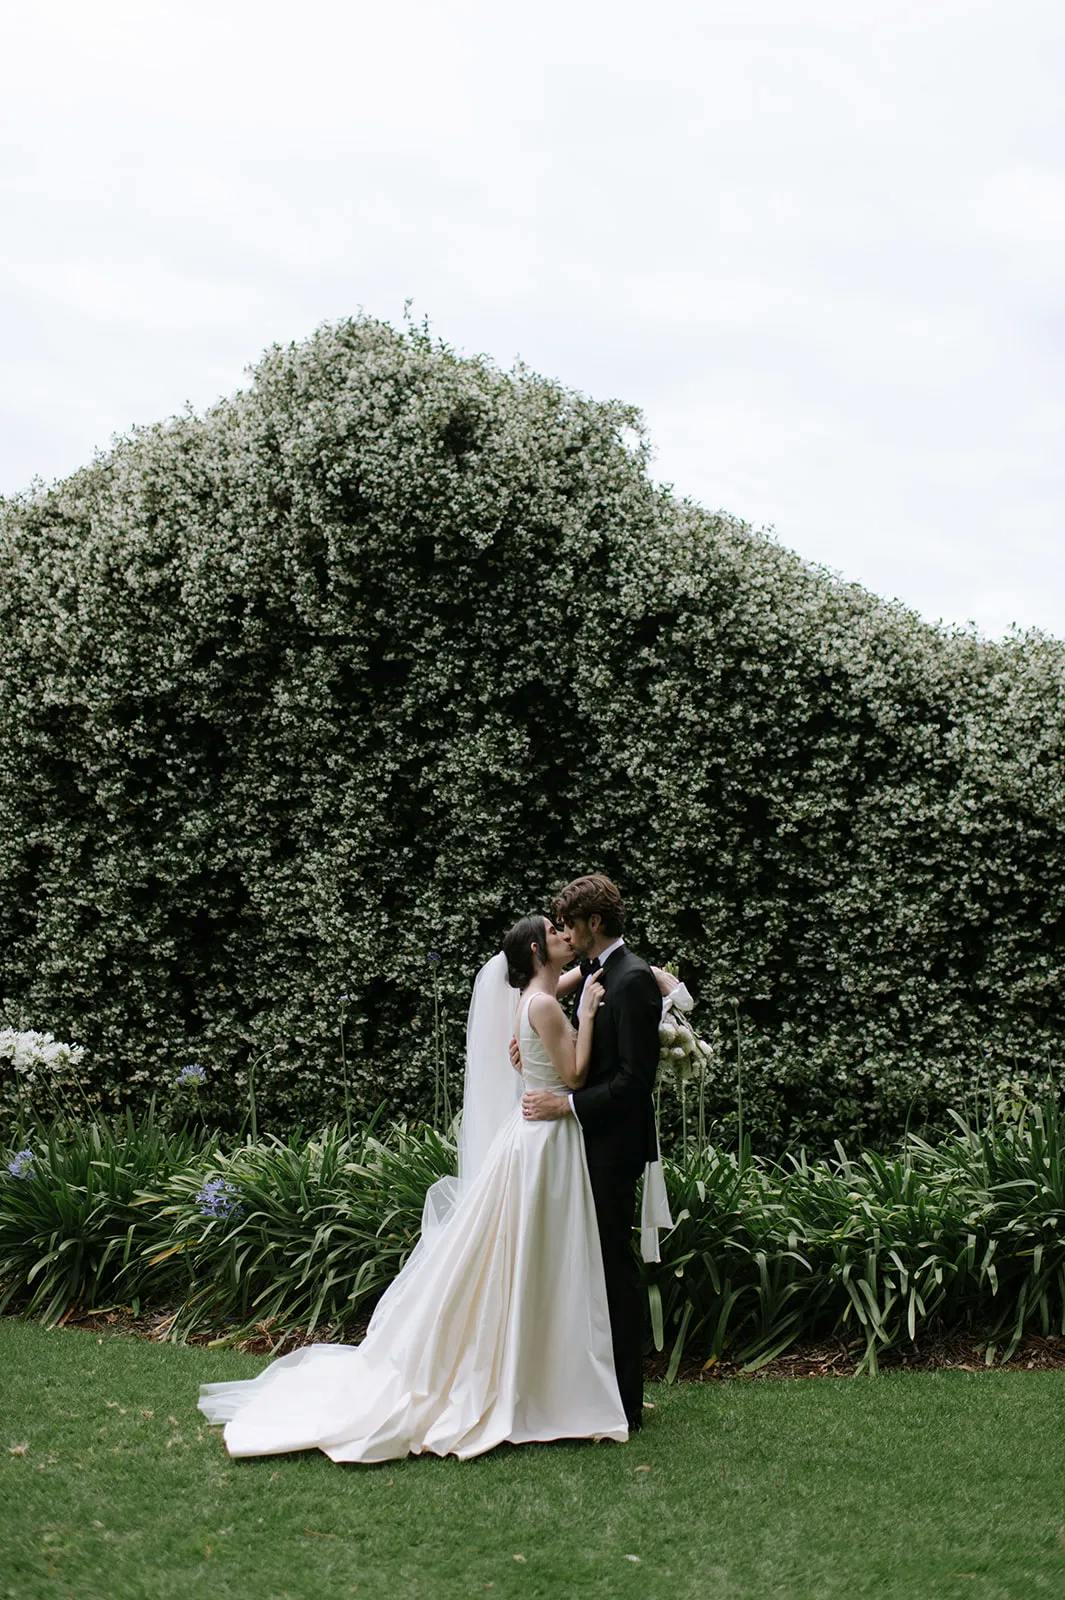 A couple standing closely in wedding attire, sharing a kiss in front of a lush, green hedge covered with white flowers. The bride wears a flowing white gown and veil, while the groom is in a black suit. They are surrounded by greenery and flowers.